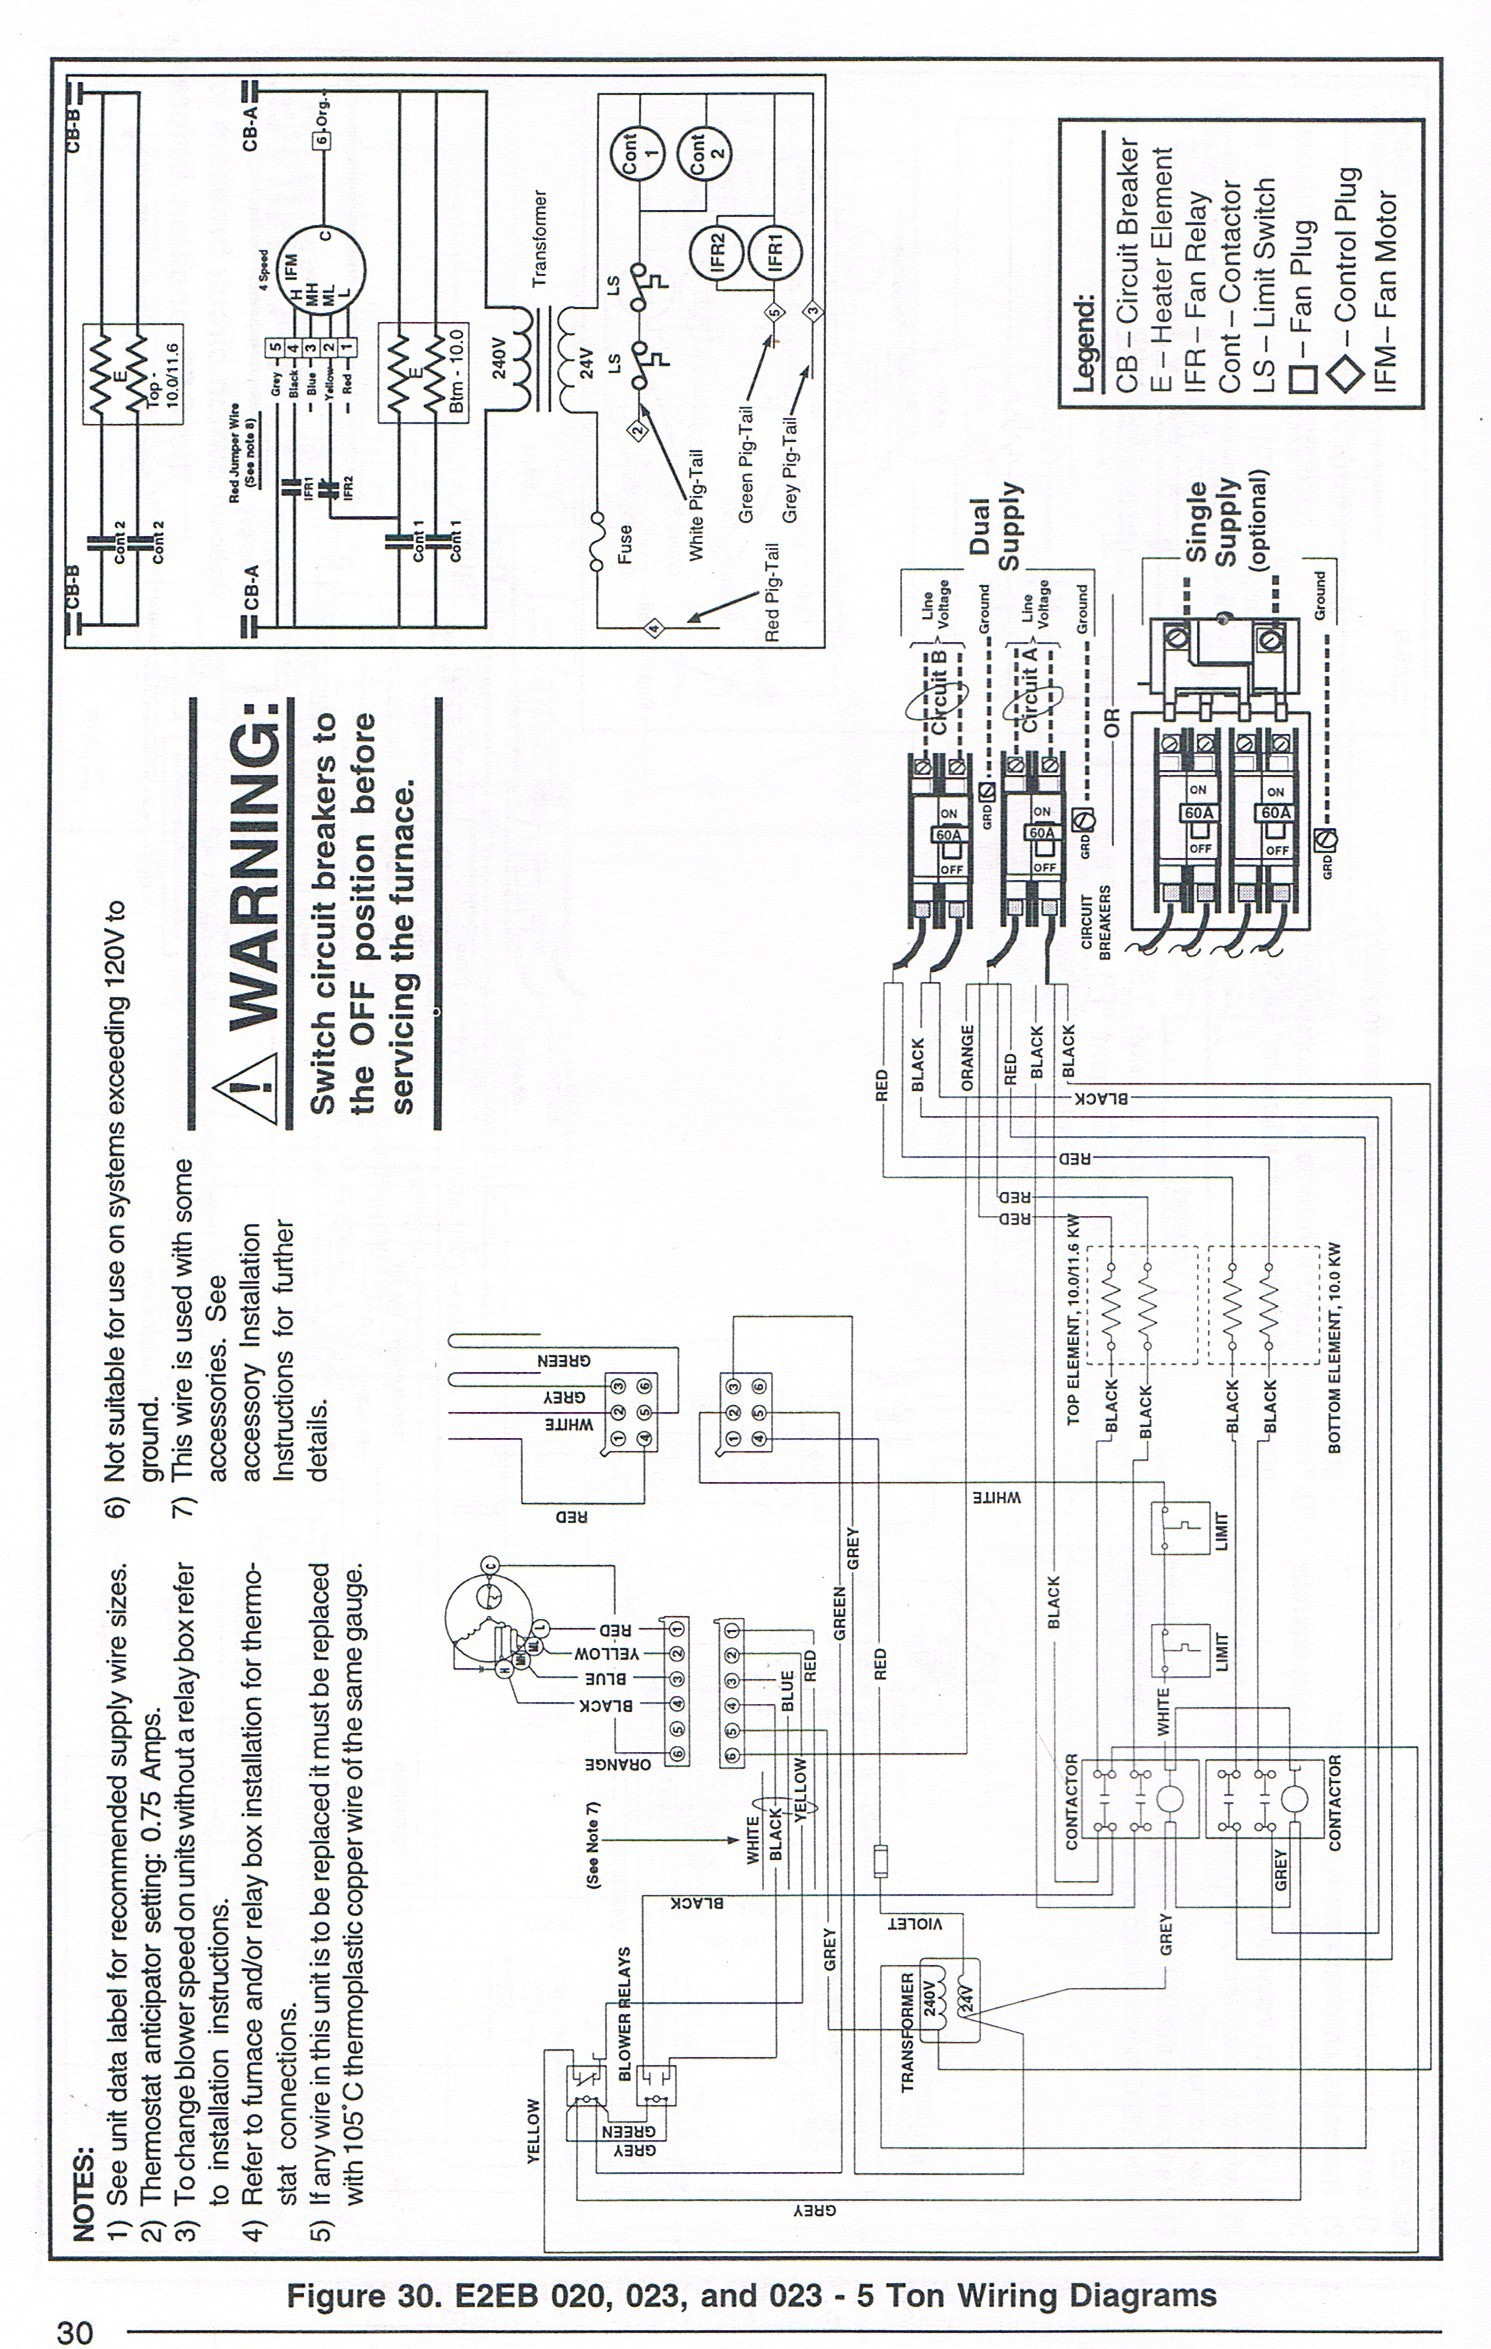 E2Eb Intertherm Electric Furnace Wiring Diagram from mainetreasurechest.com